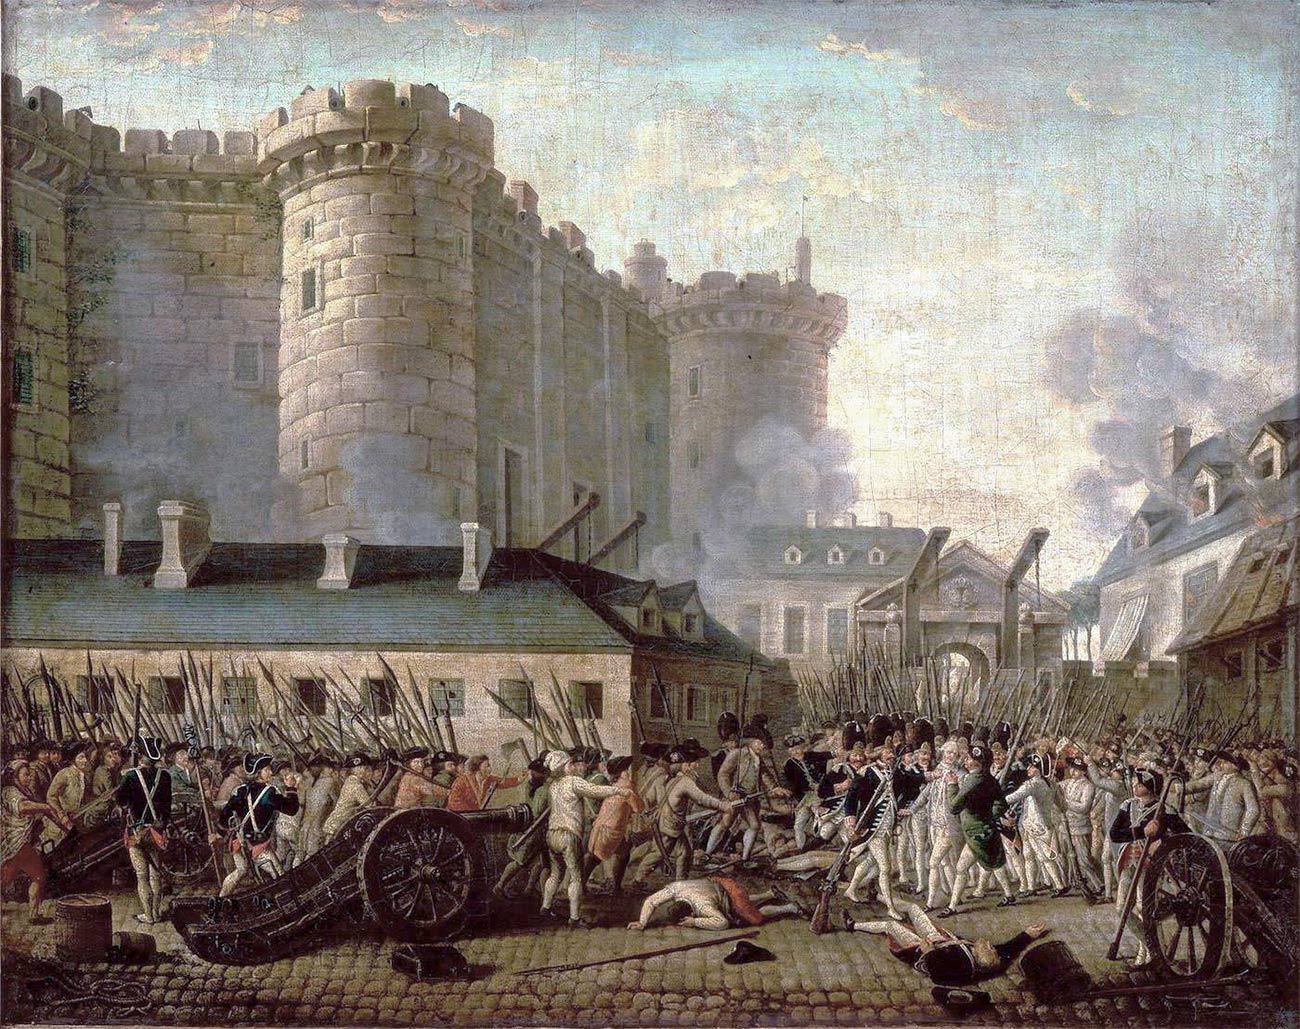 Why did the French Revolution fail?